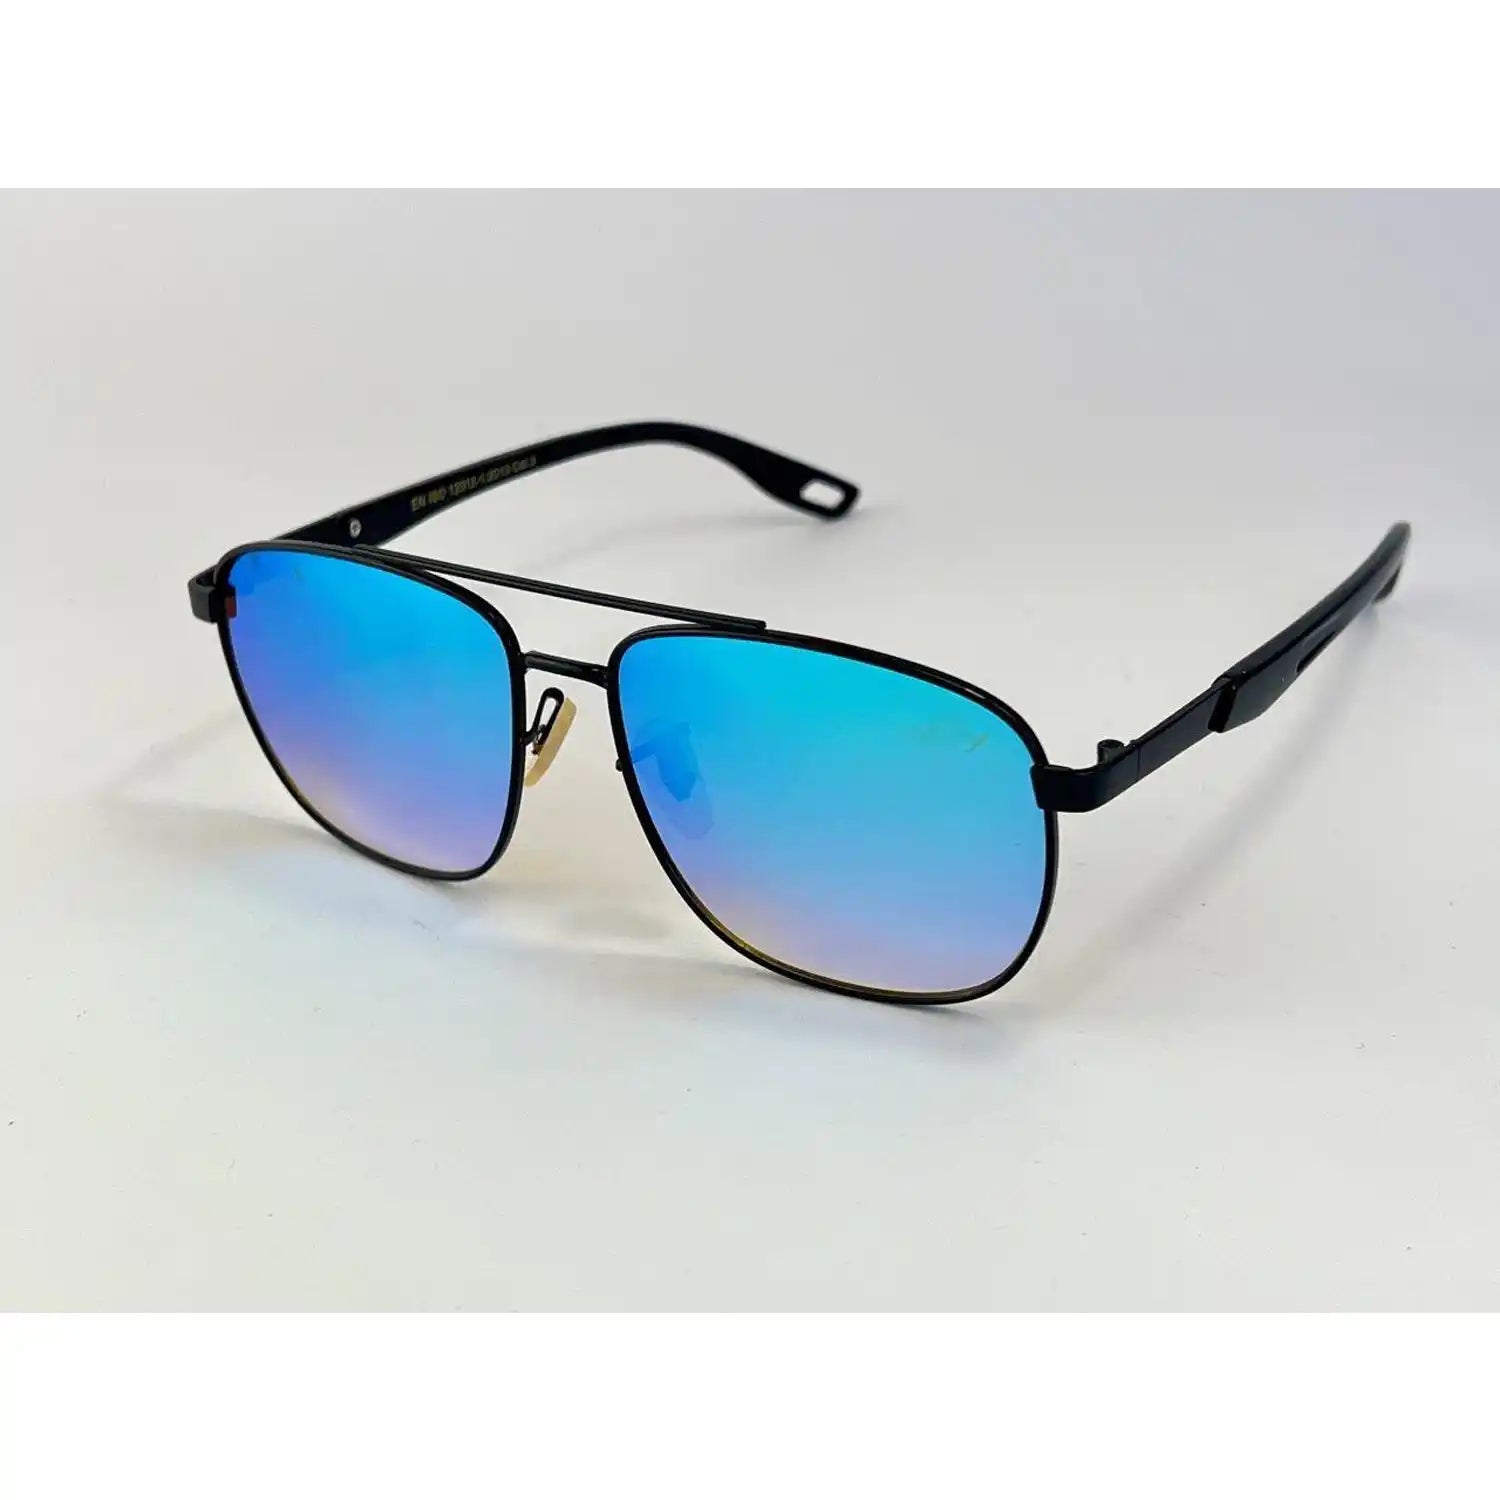 Franco Carducci Black Metal Preppy with Blue Lens 1 Shaws Department Stores